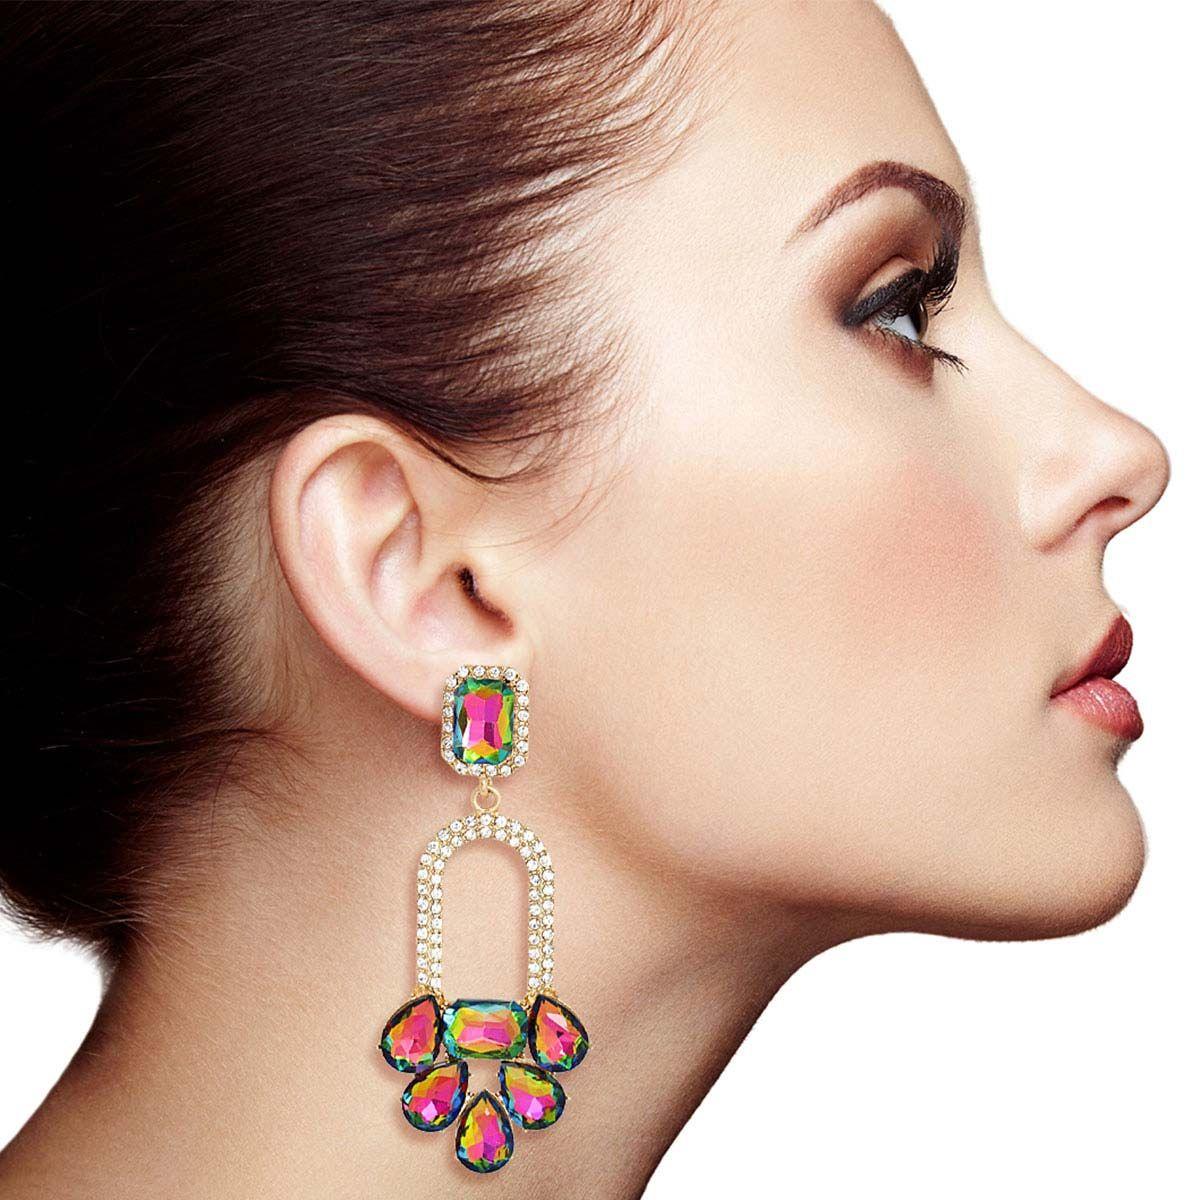 Arched Statement Earrings Pink-green Color